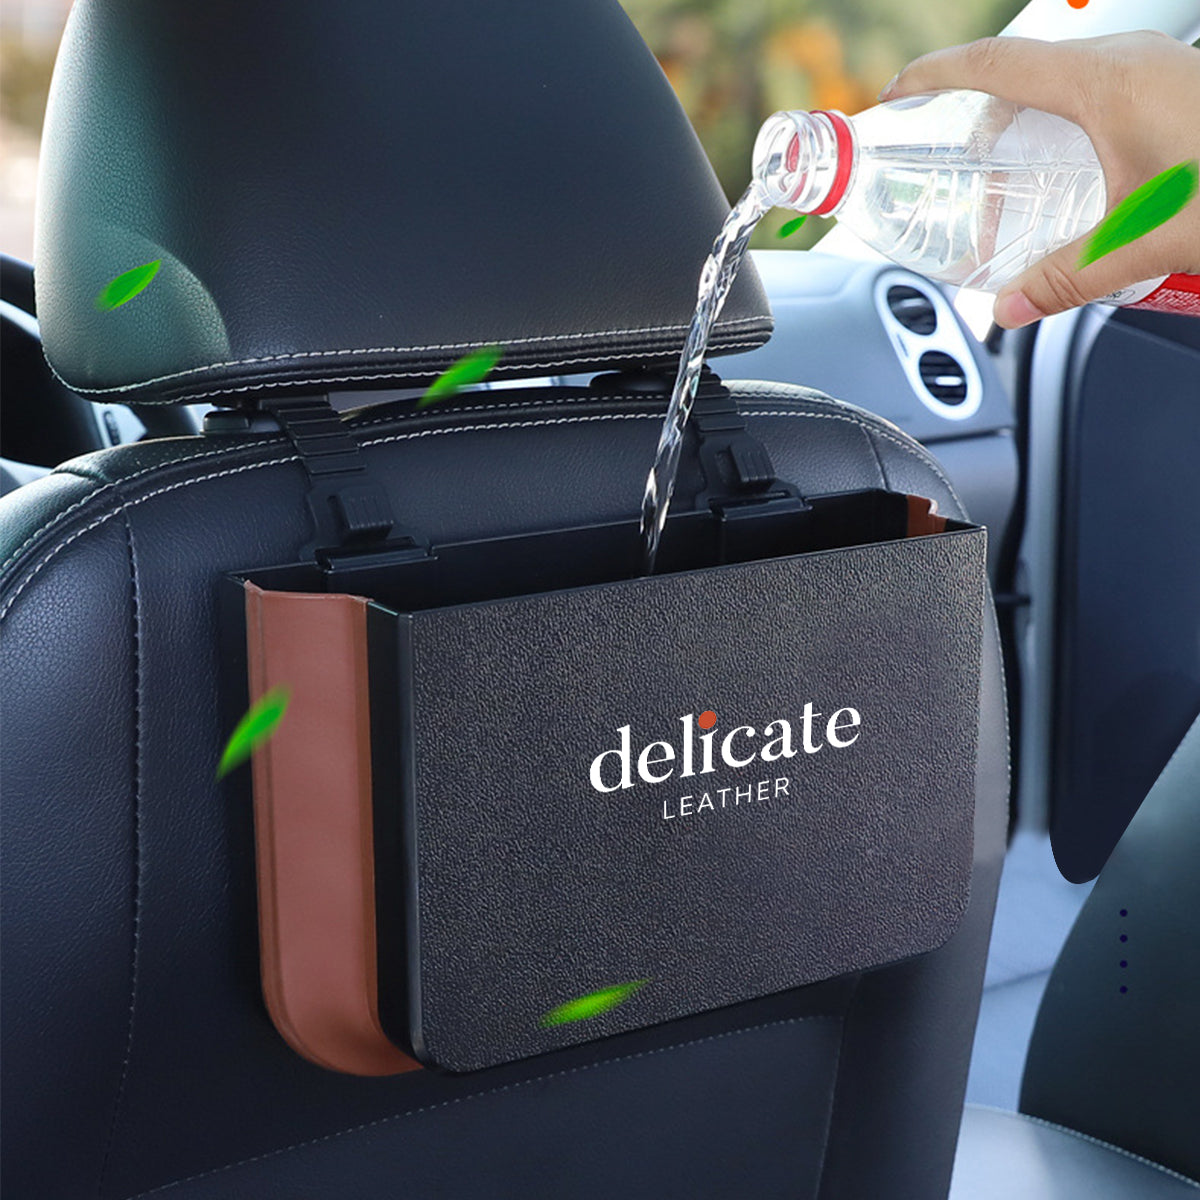 Delicate Leather Hanging Waterproof Car Trash can-Foldable, Custom For Your Cars, Waterproof, and Equipped with Cup Holders and Trays. Multi-Purpose, Car Accessories PF11992